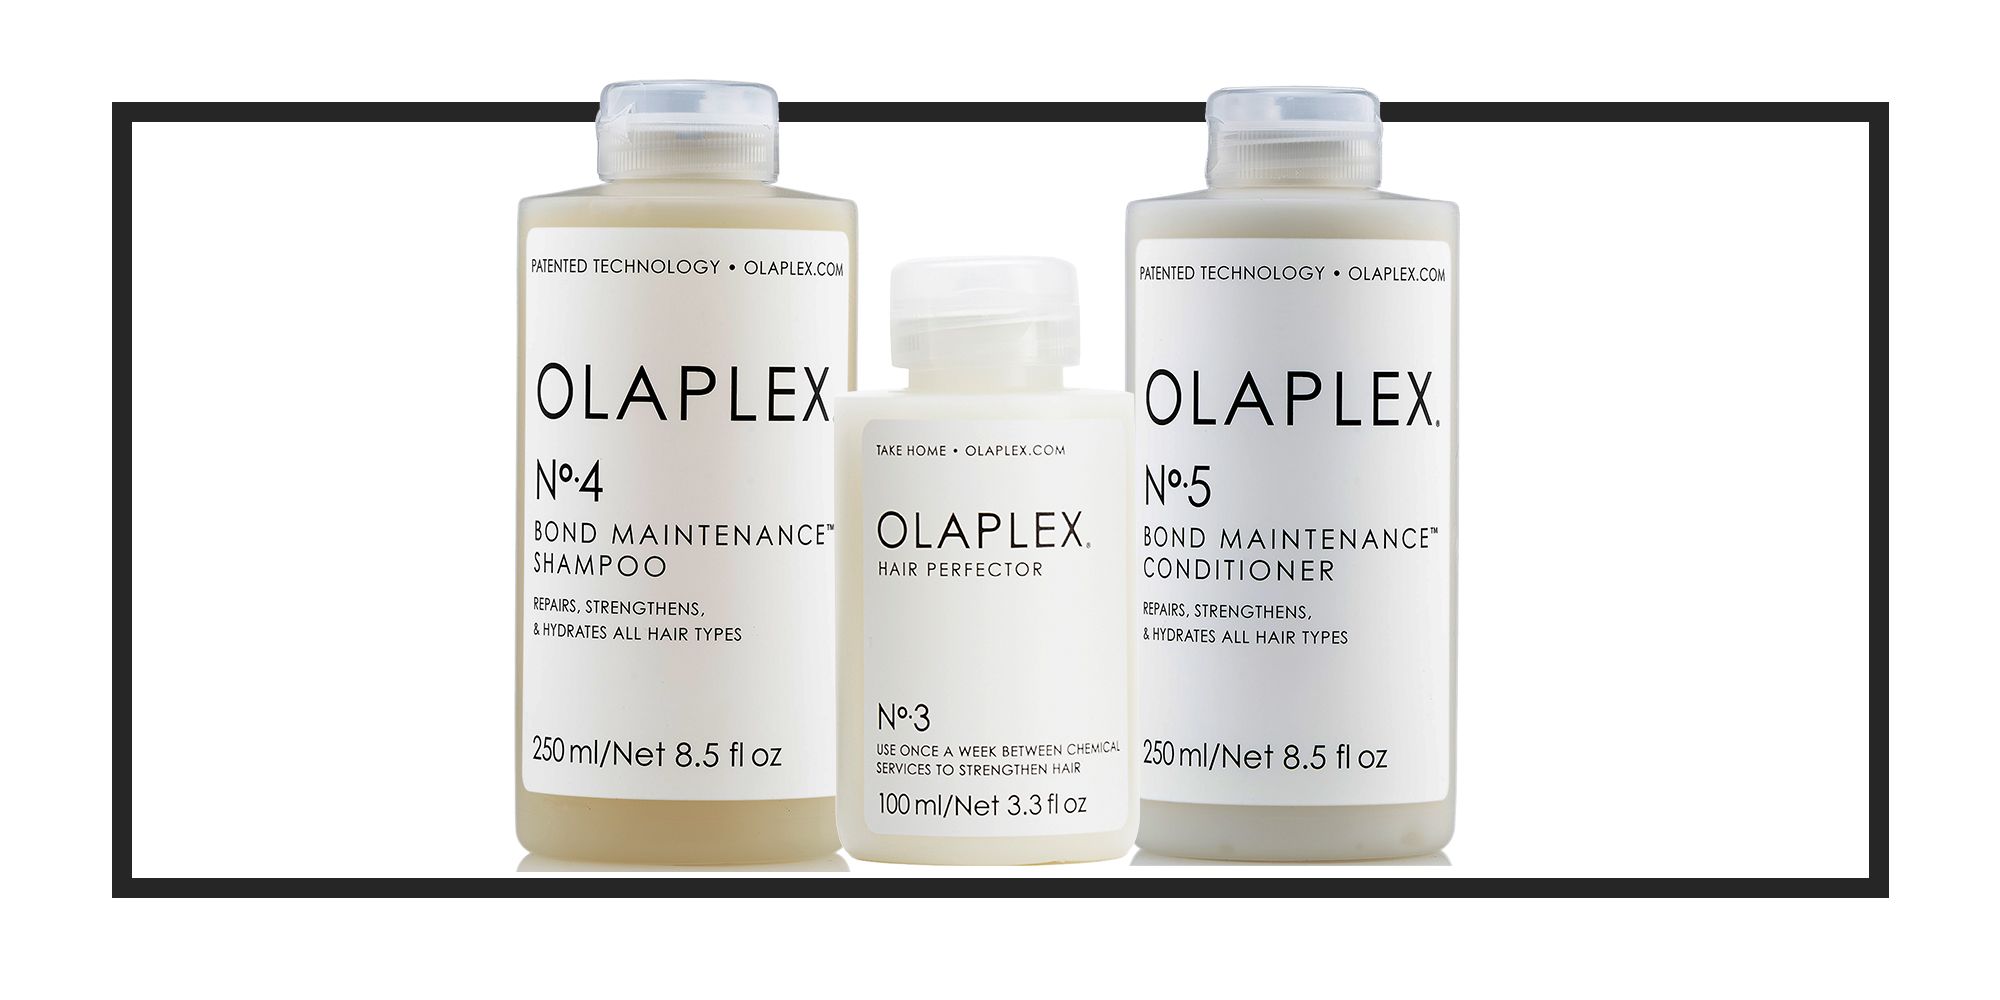 Olaplex launches shampoo and conditioner for damaged hair - New Olaplex  products